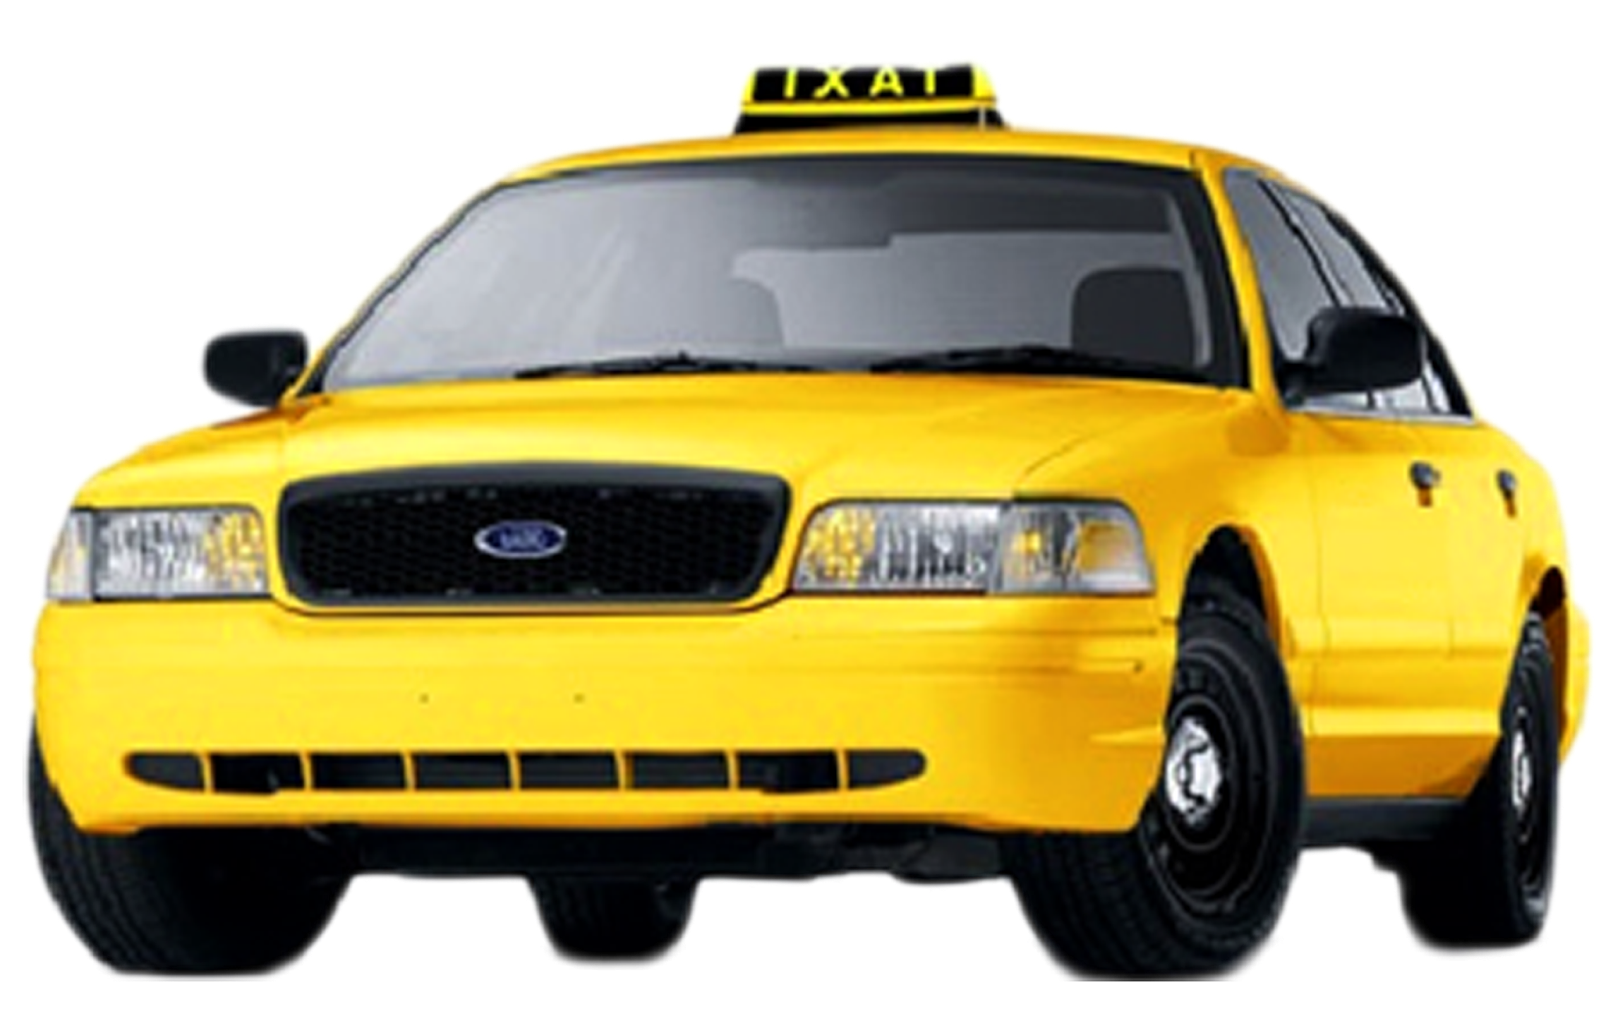 Taxi Cab High-Quality PNG